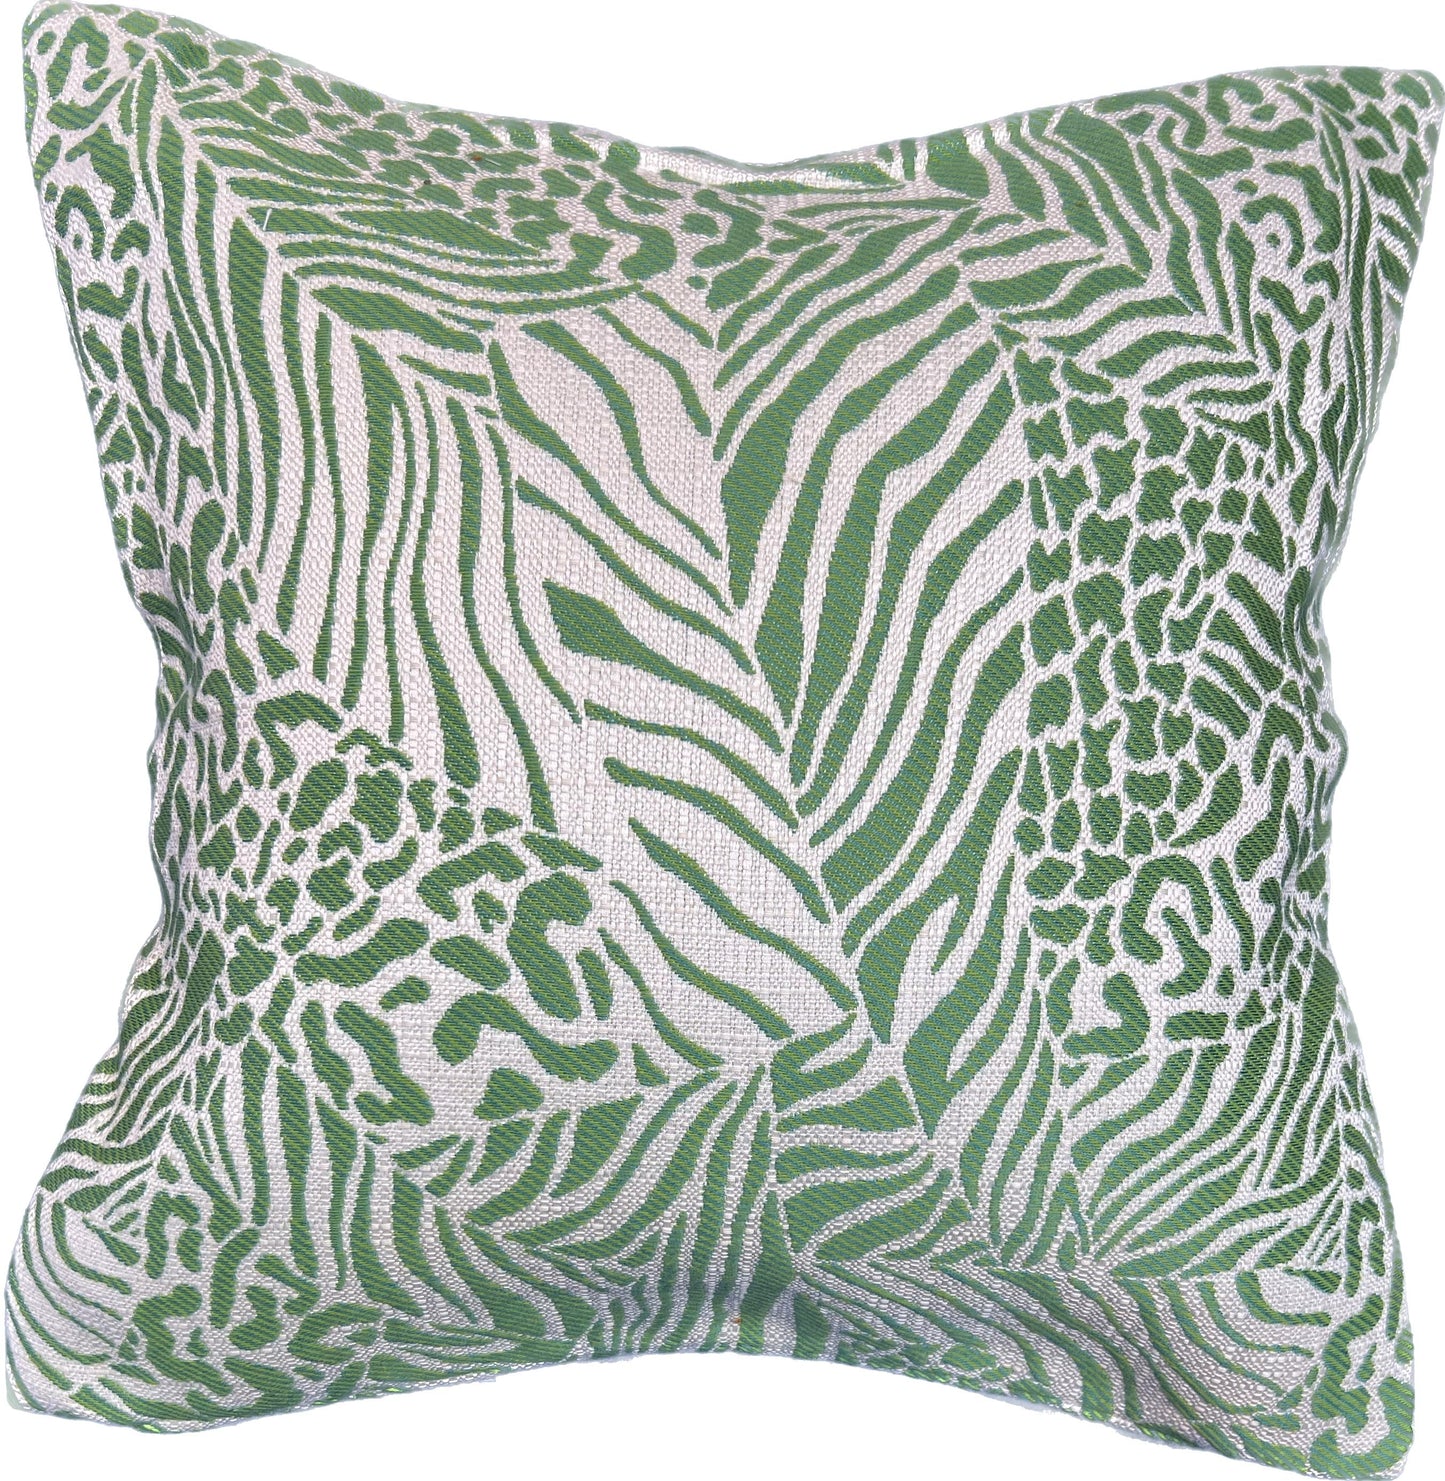 18"x18"  Leaf Pillow Cover